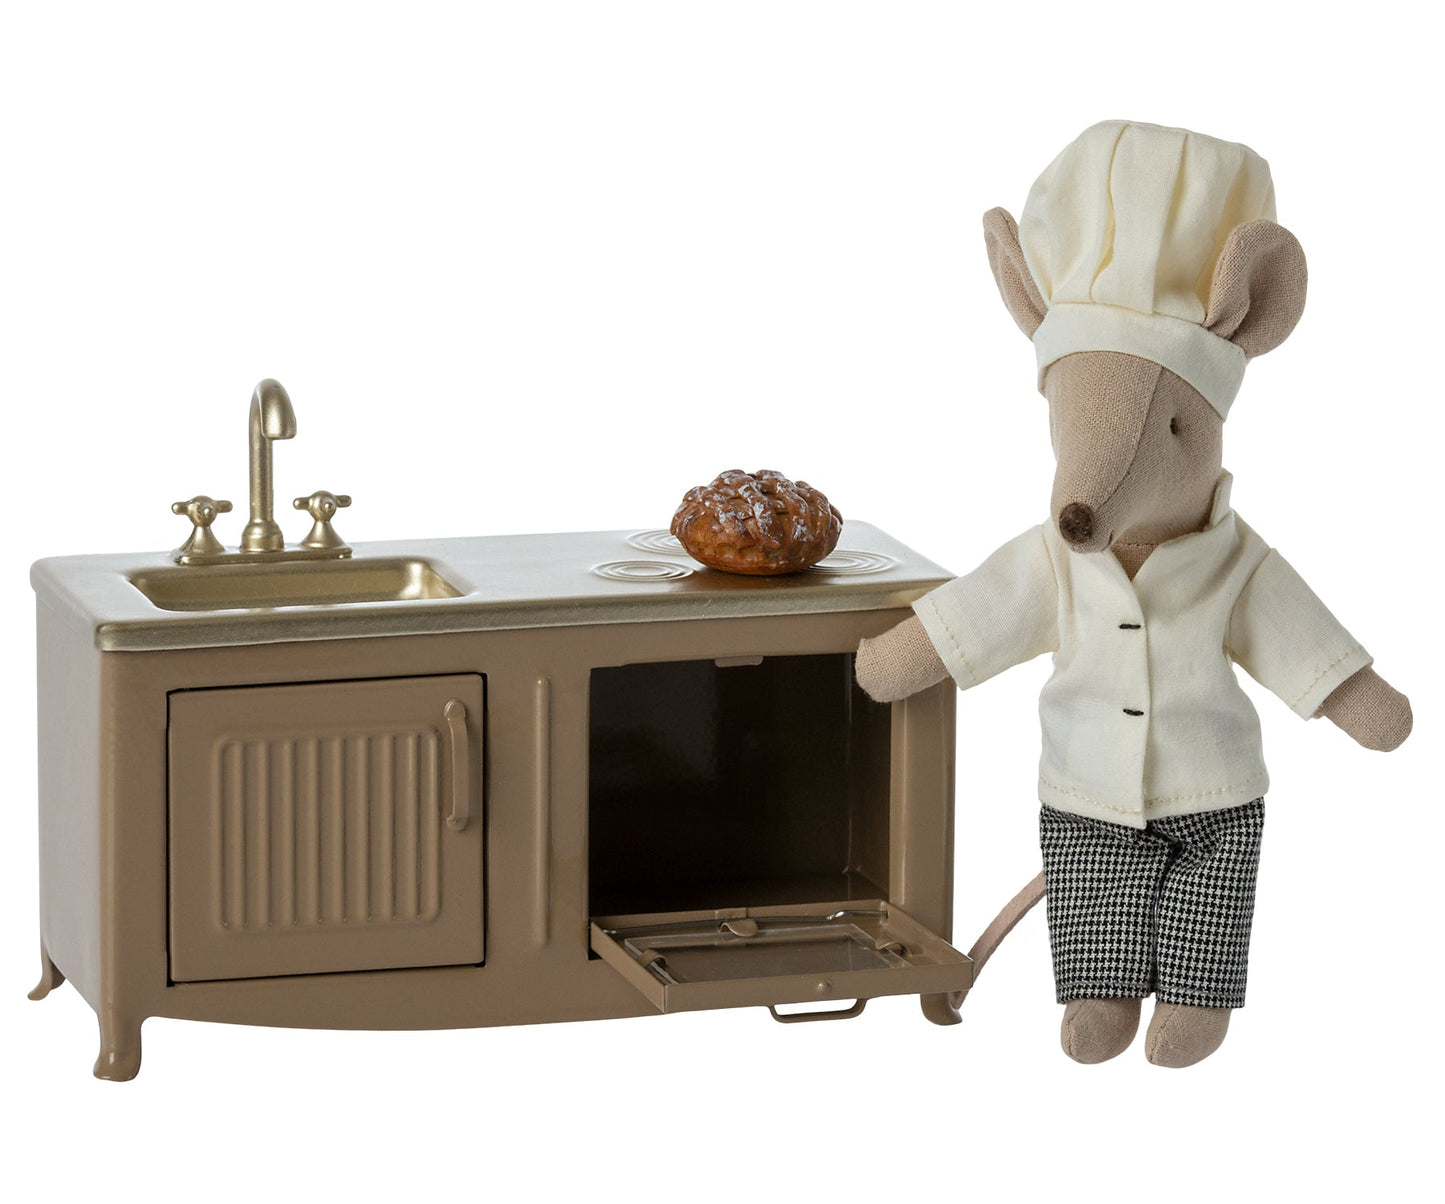 * SECONDS, Wonky Oven Door Handles & Flaws In Paintwork, See Pictures 2, 3 & 4 For Examples* - Maileg Kitchen, Mouse, Light Brown